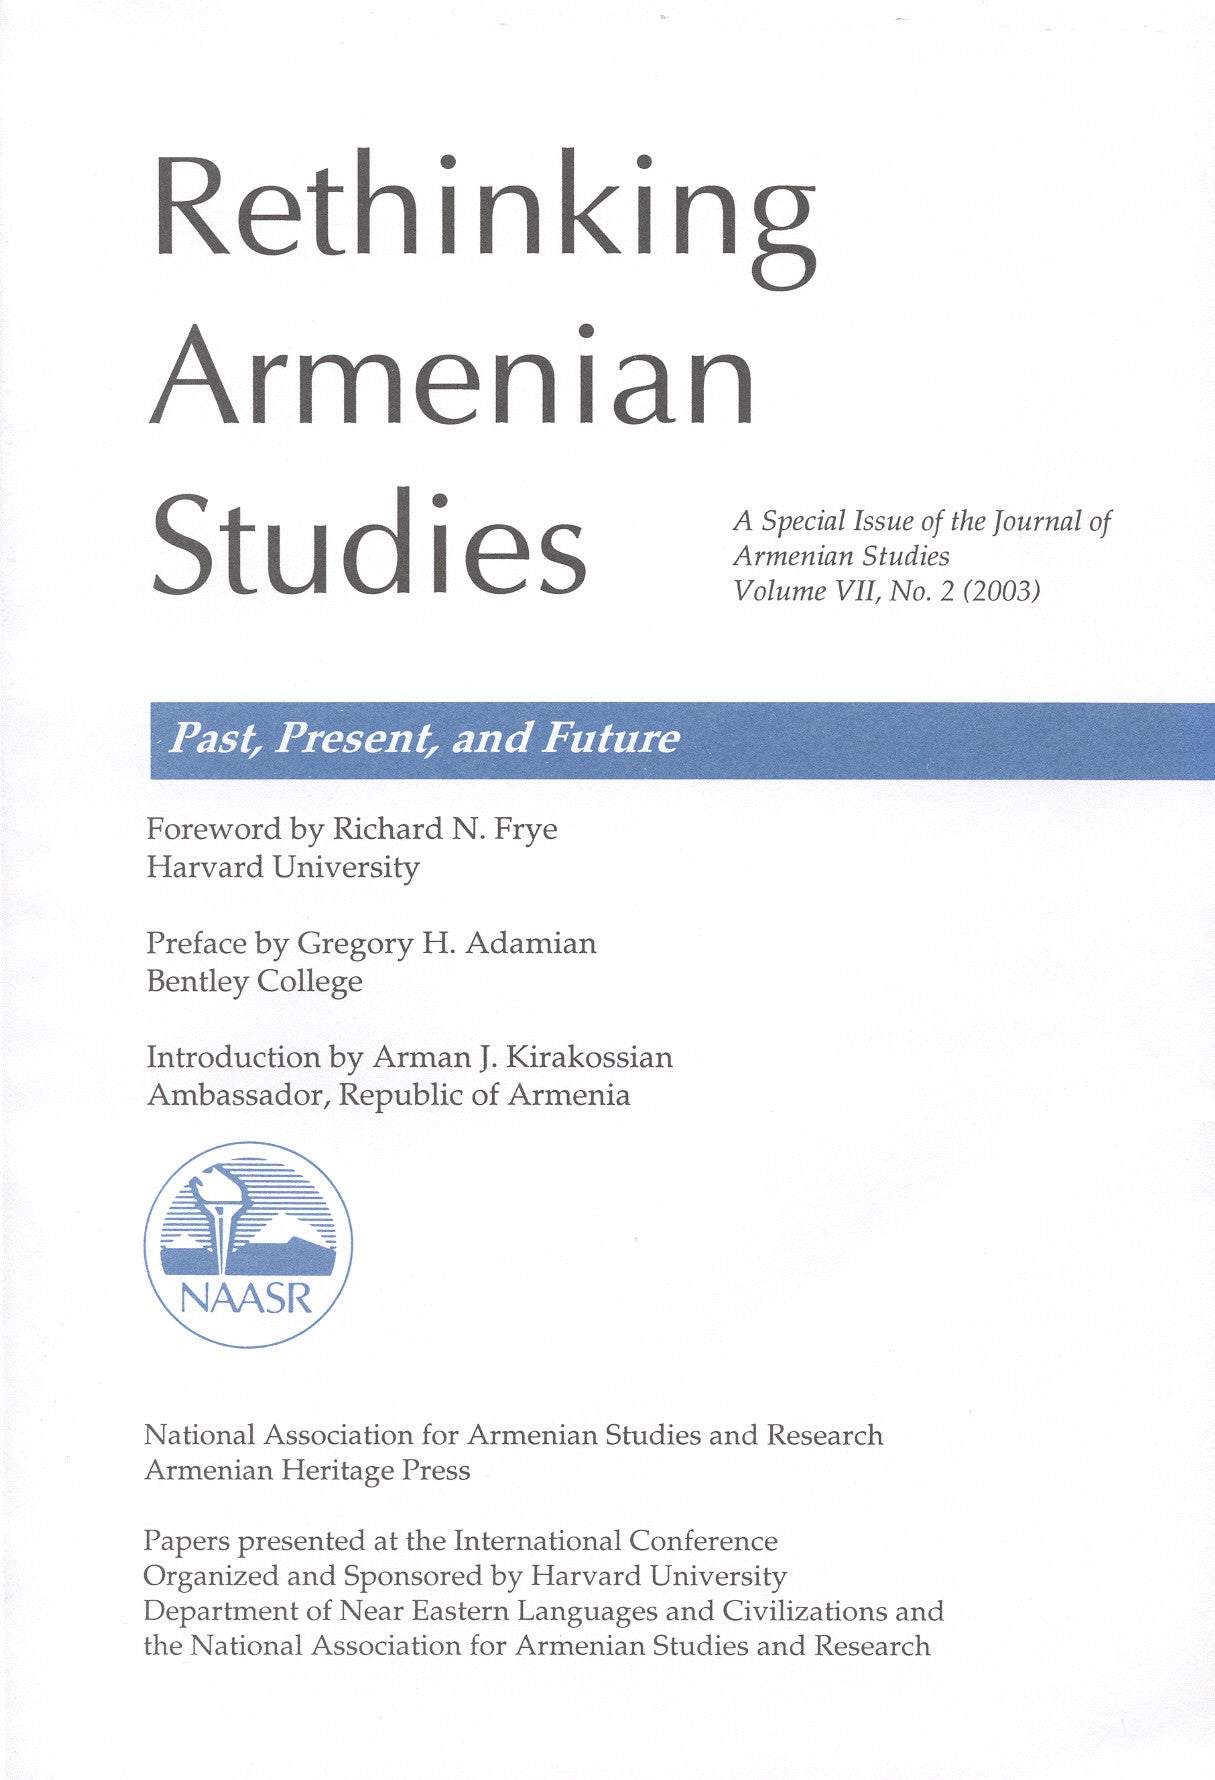 JOURNAL OF ARMENIAN STUDIES; Volume VII, Number 2: Fall 2003 Special Issue: Rethinking Armenian Studies: Past Present and Future